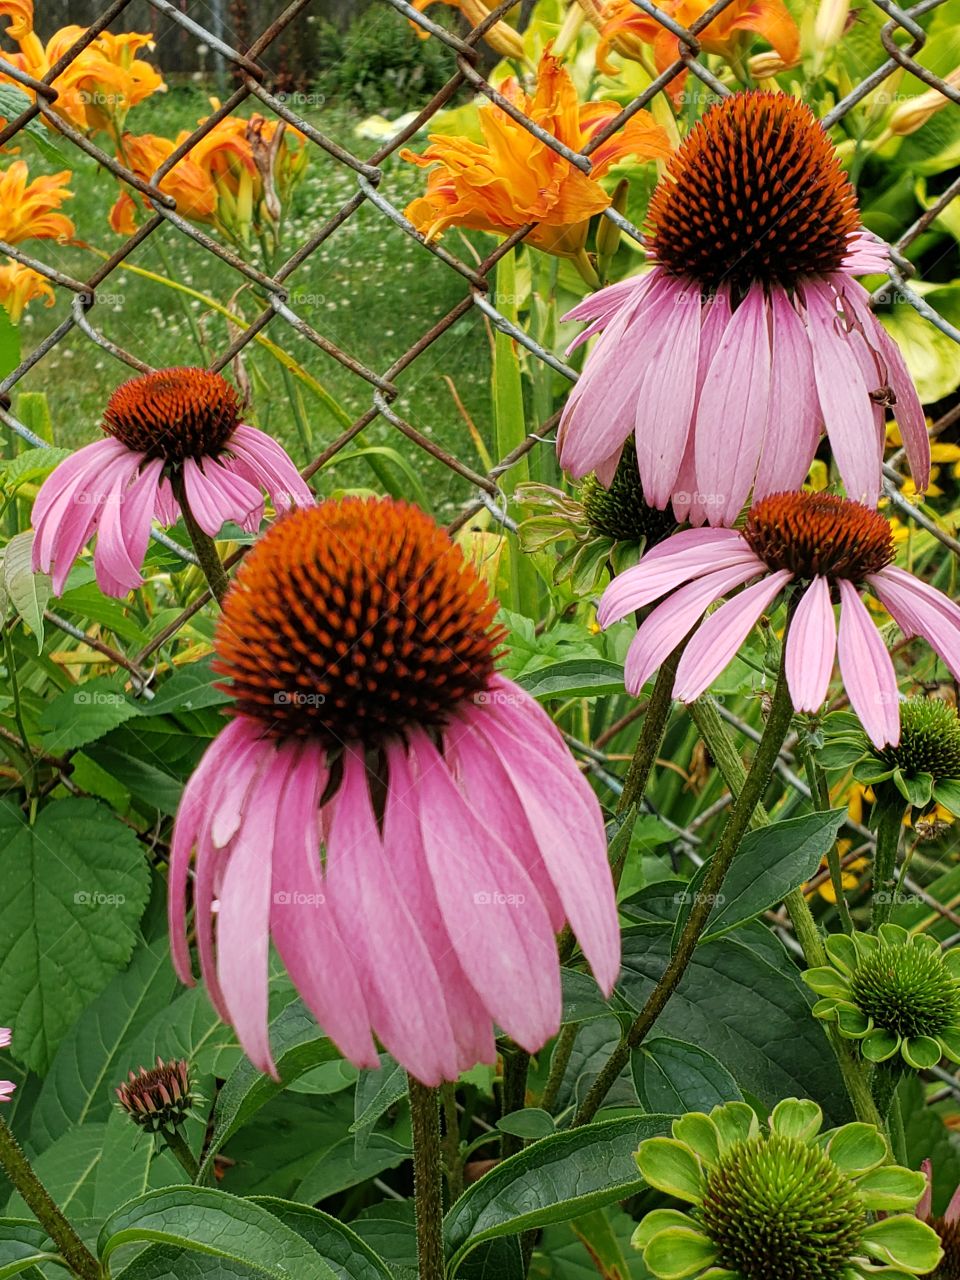 Pink Coneflowers and Orange Tiger lilies